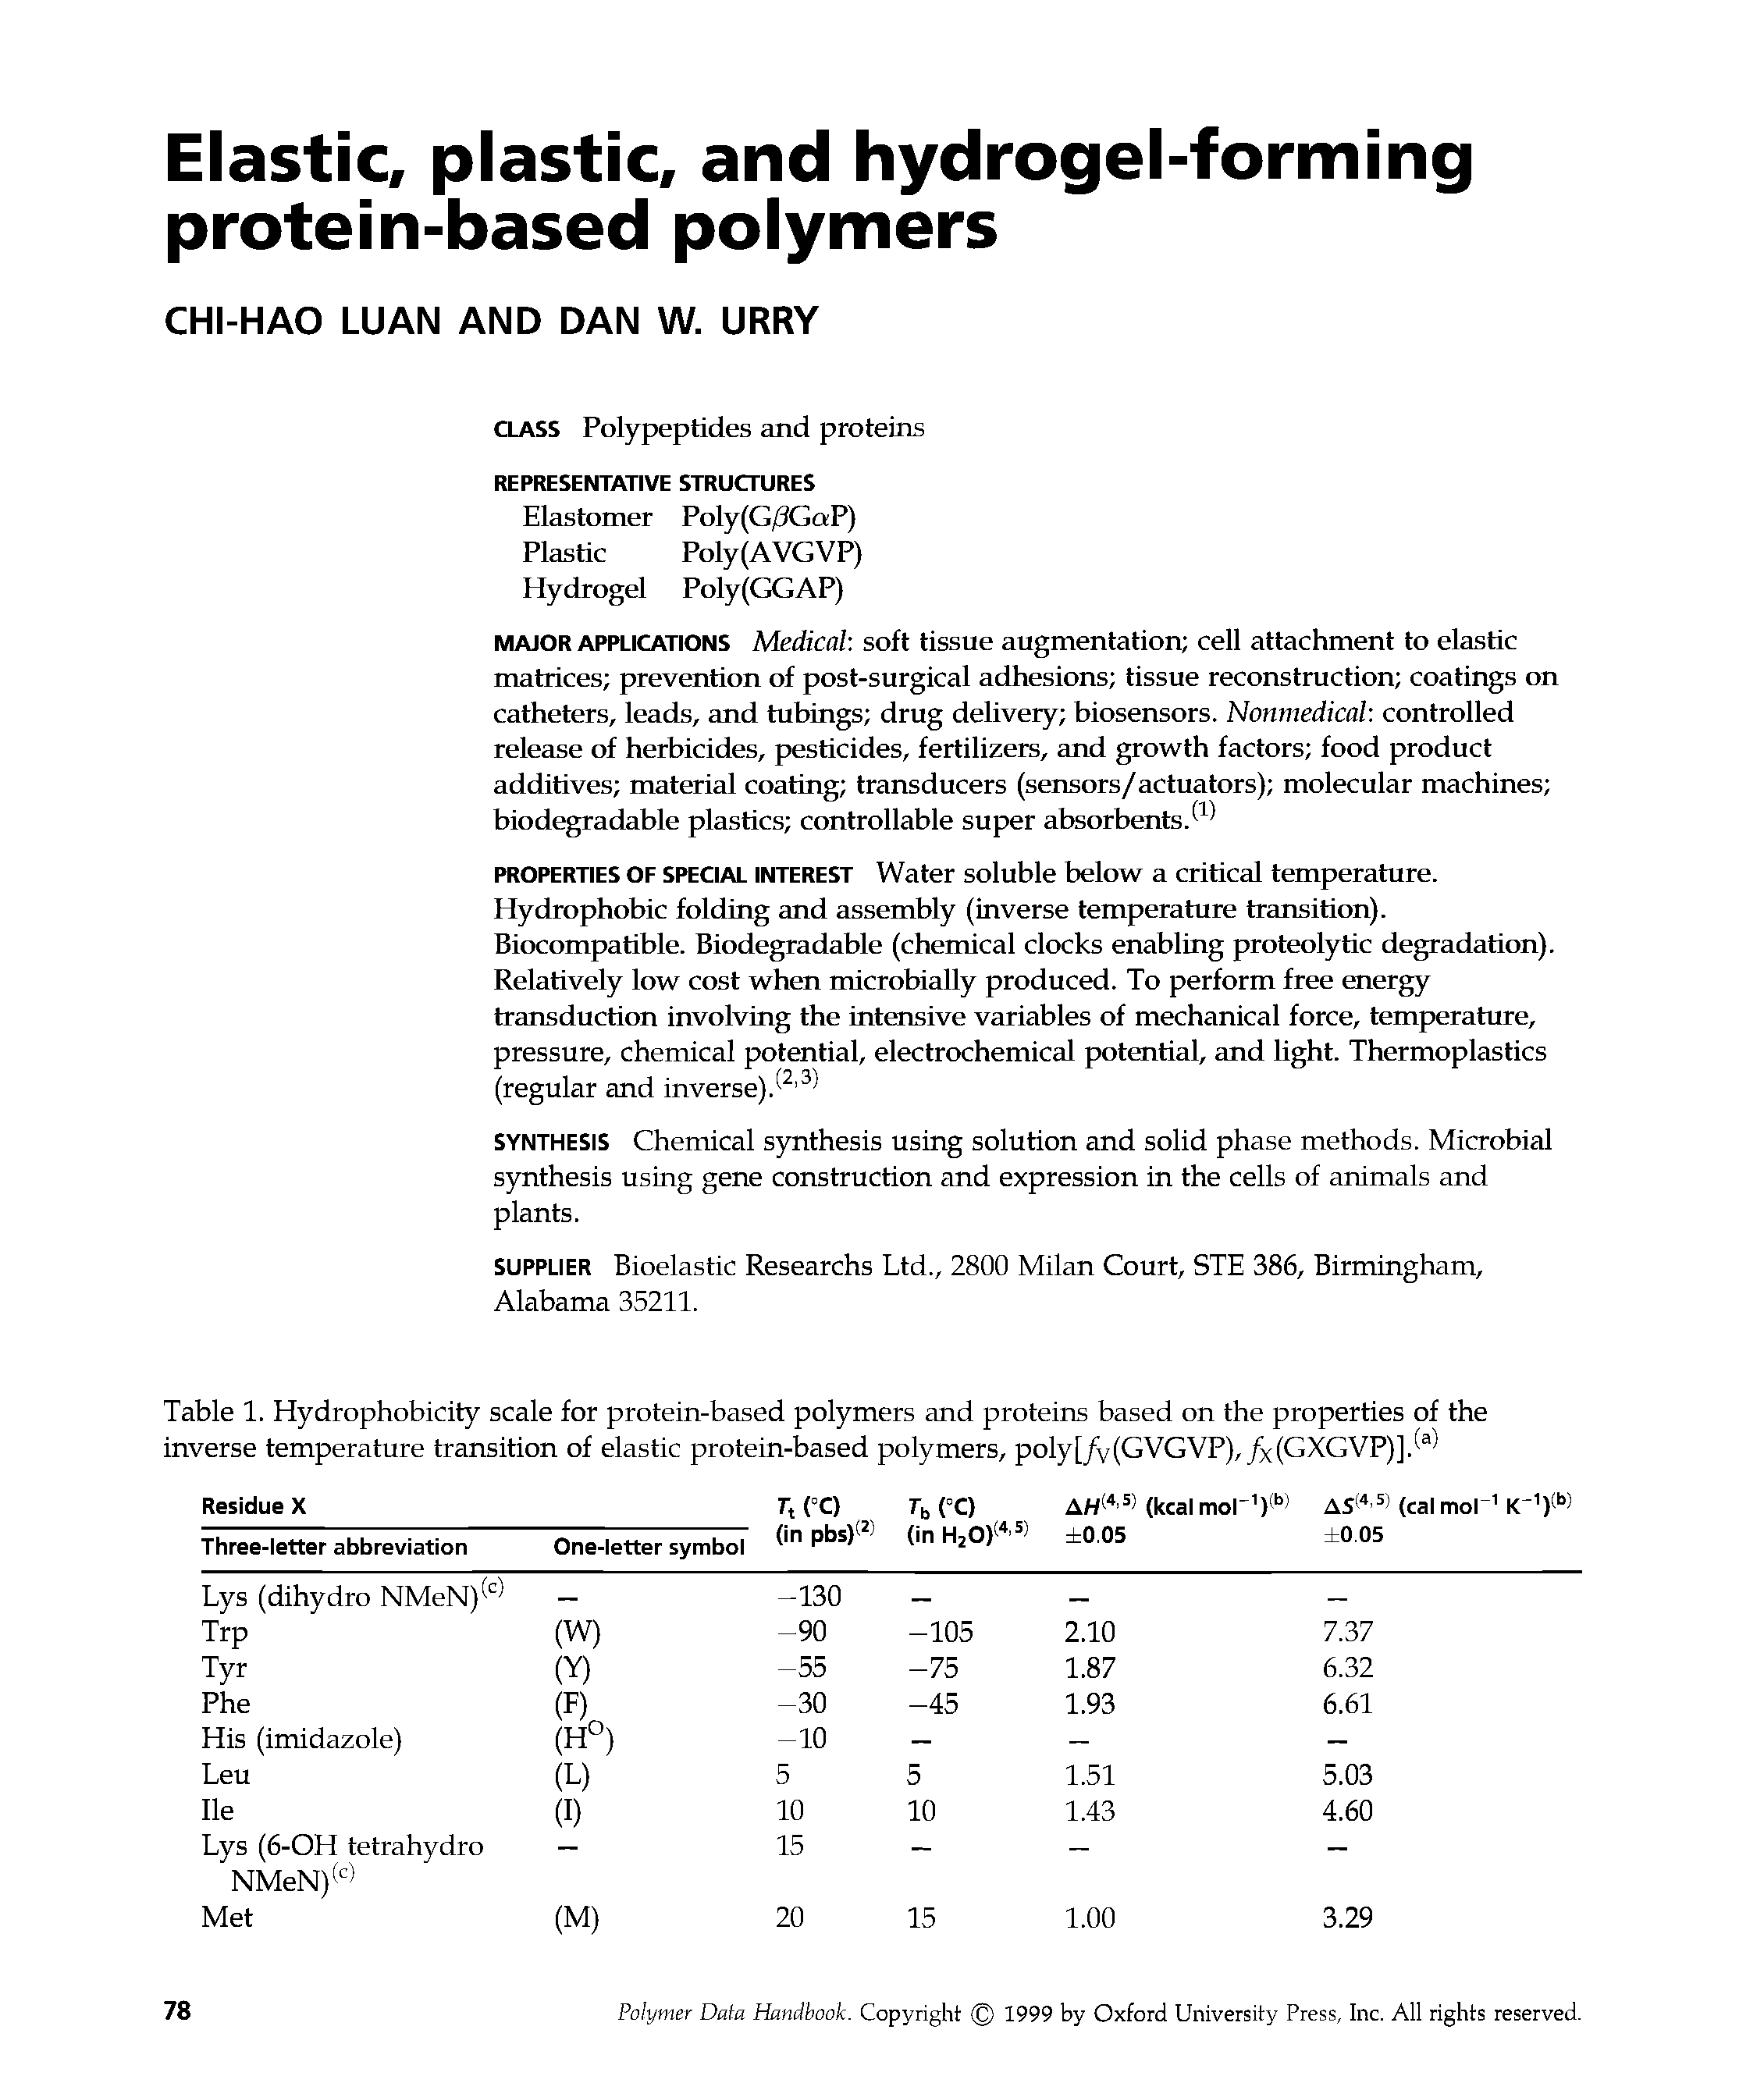 Table 1. Hydrophobicity scale for protein-based polymers and proteins based on the properties of the inverse temperature transition of elastic protein-based polymers, poly[/v(GVGVP), (GXGVP)]. ...